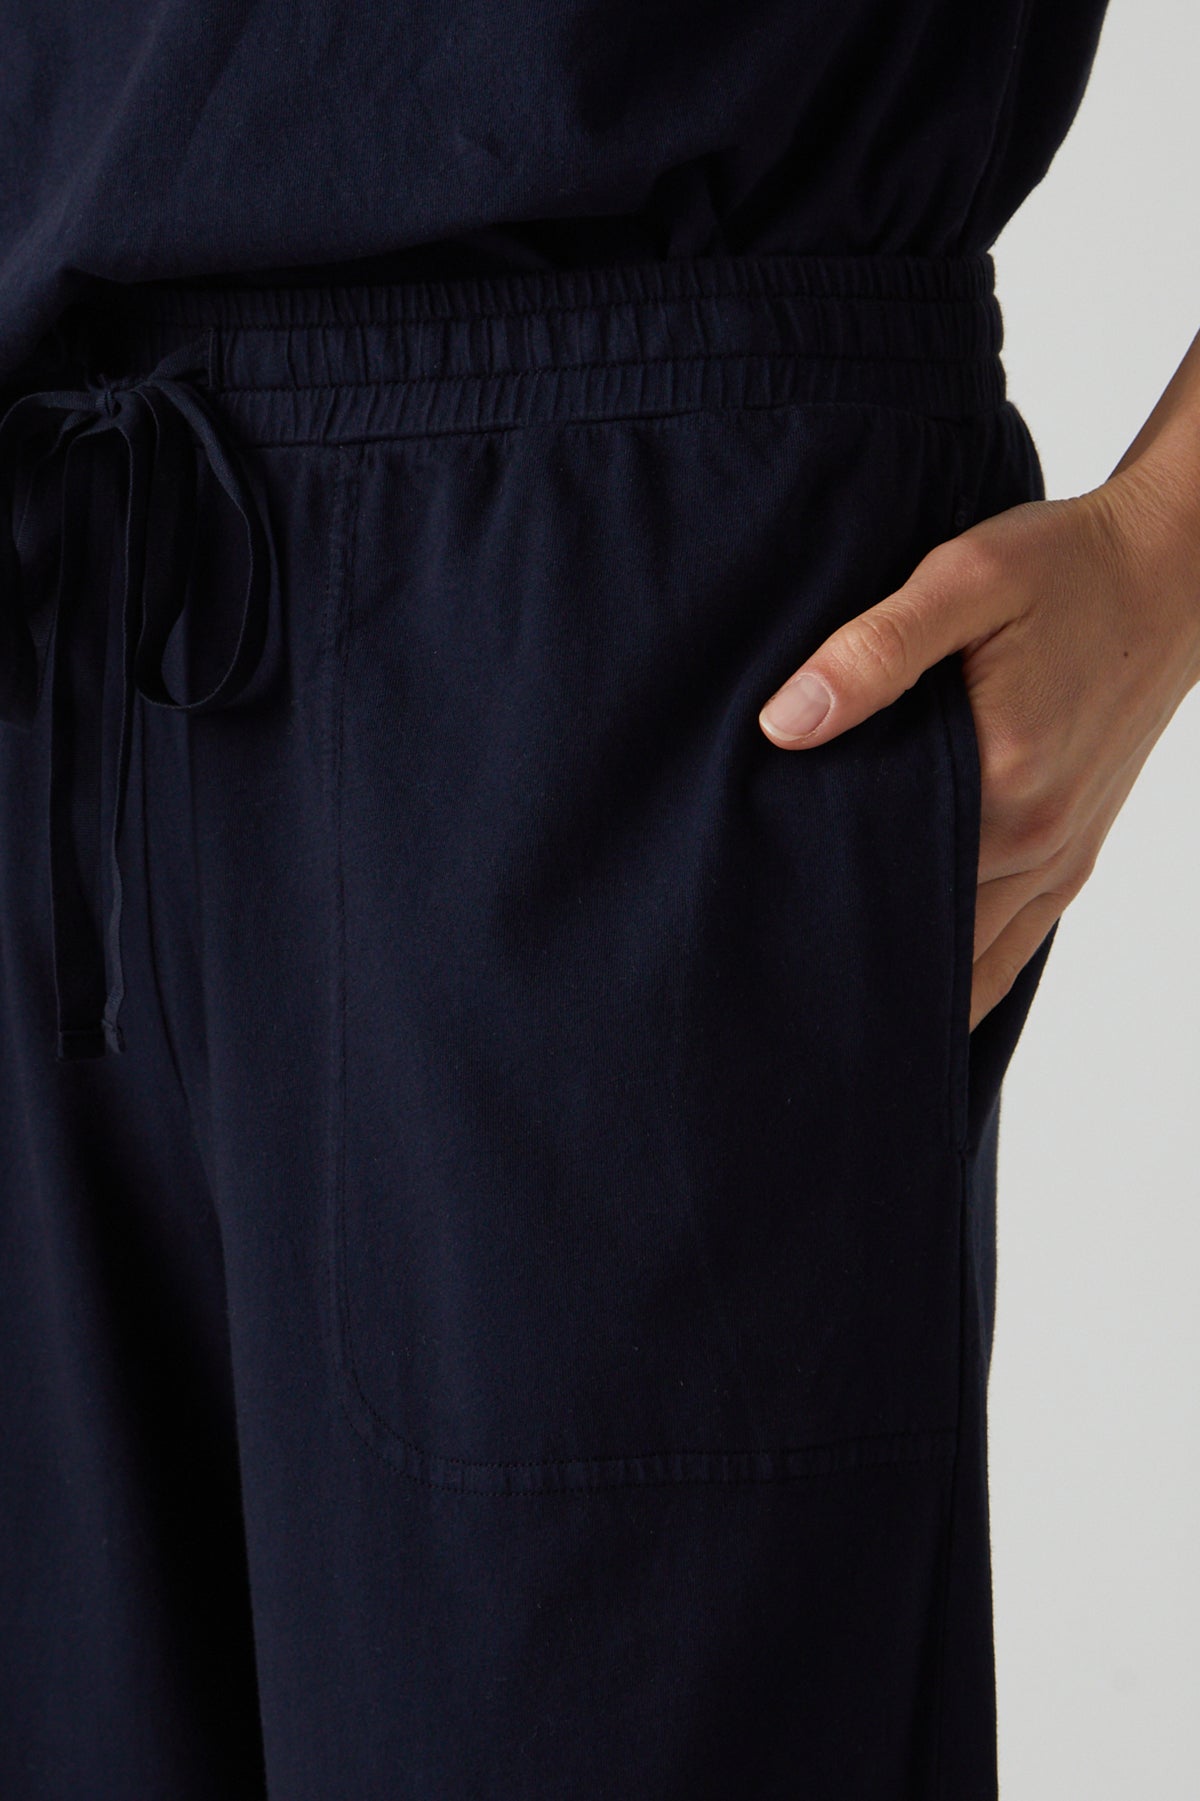   Pismo Pant in navy front pocket detail 